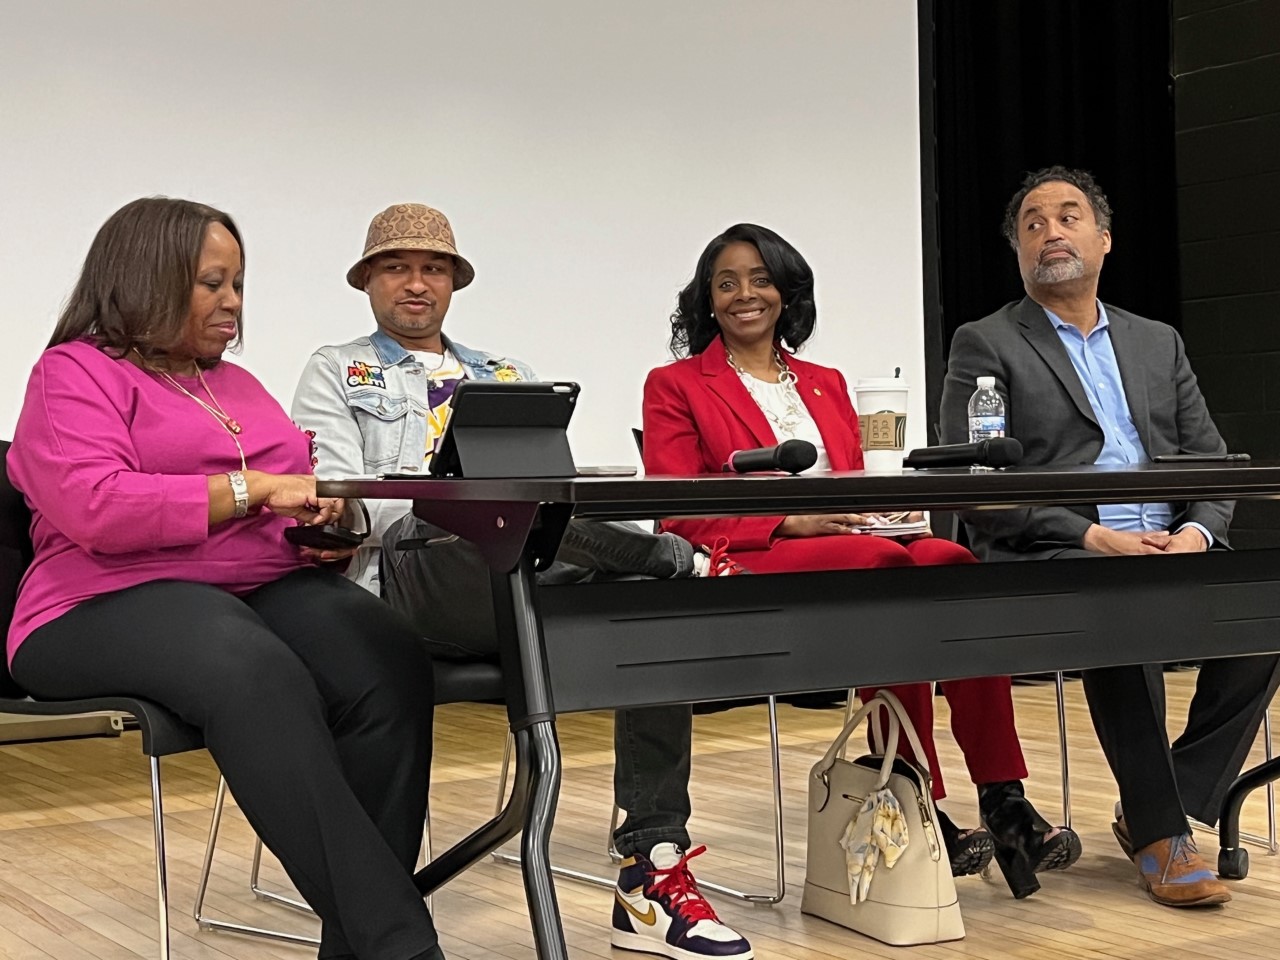 Howard University Hosts Media Town Hall, ‘Reporting While Black: Confronting Systemic Racism’